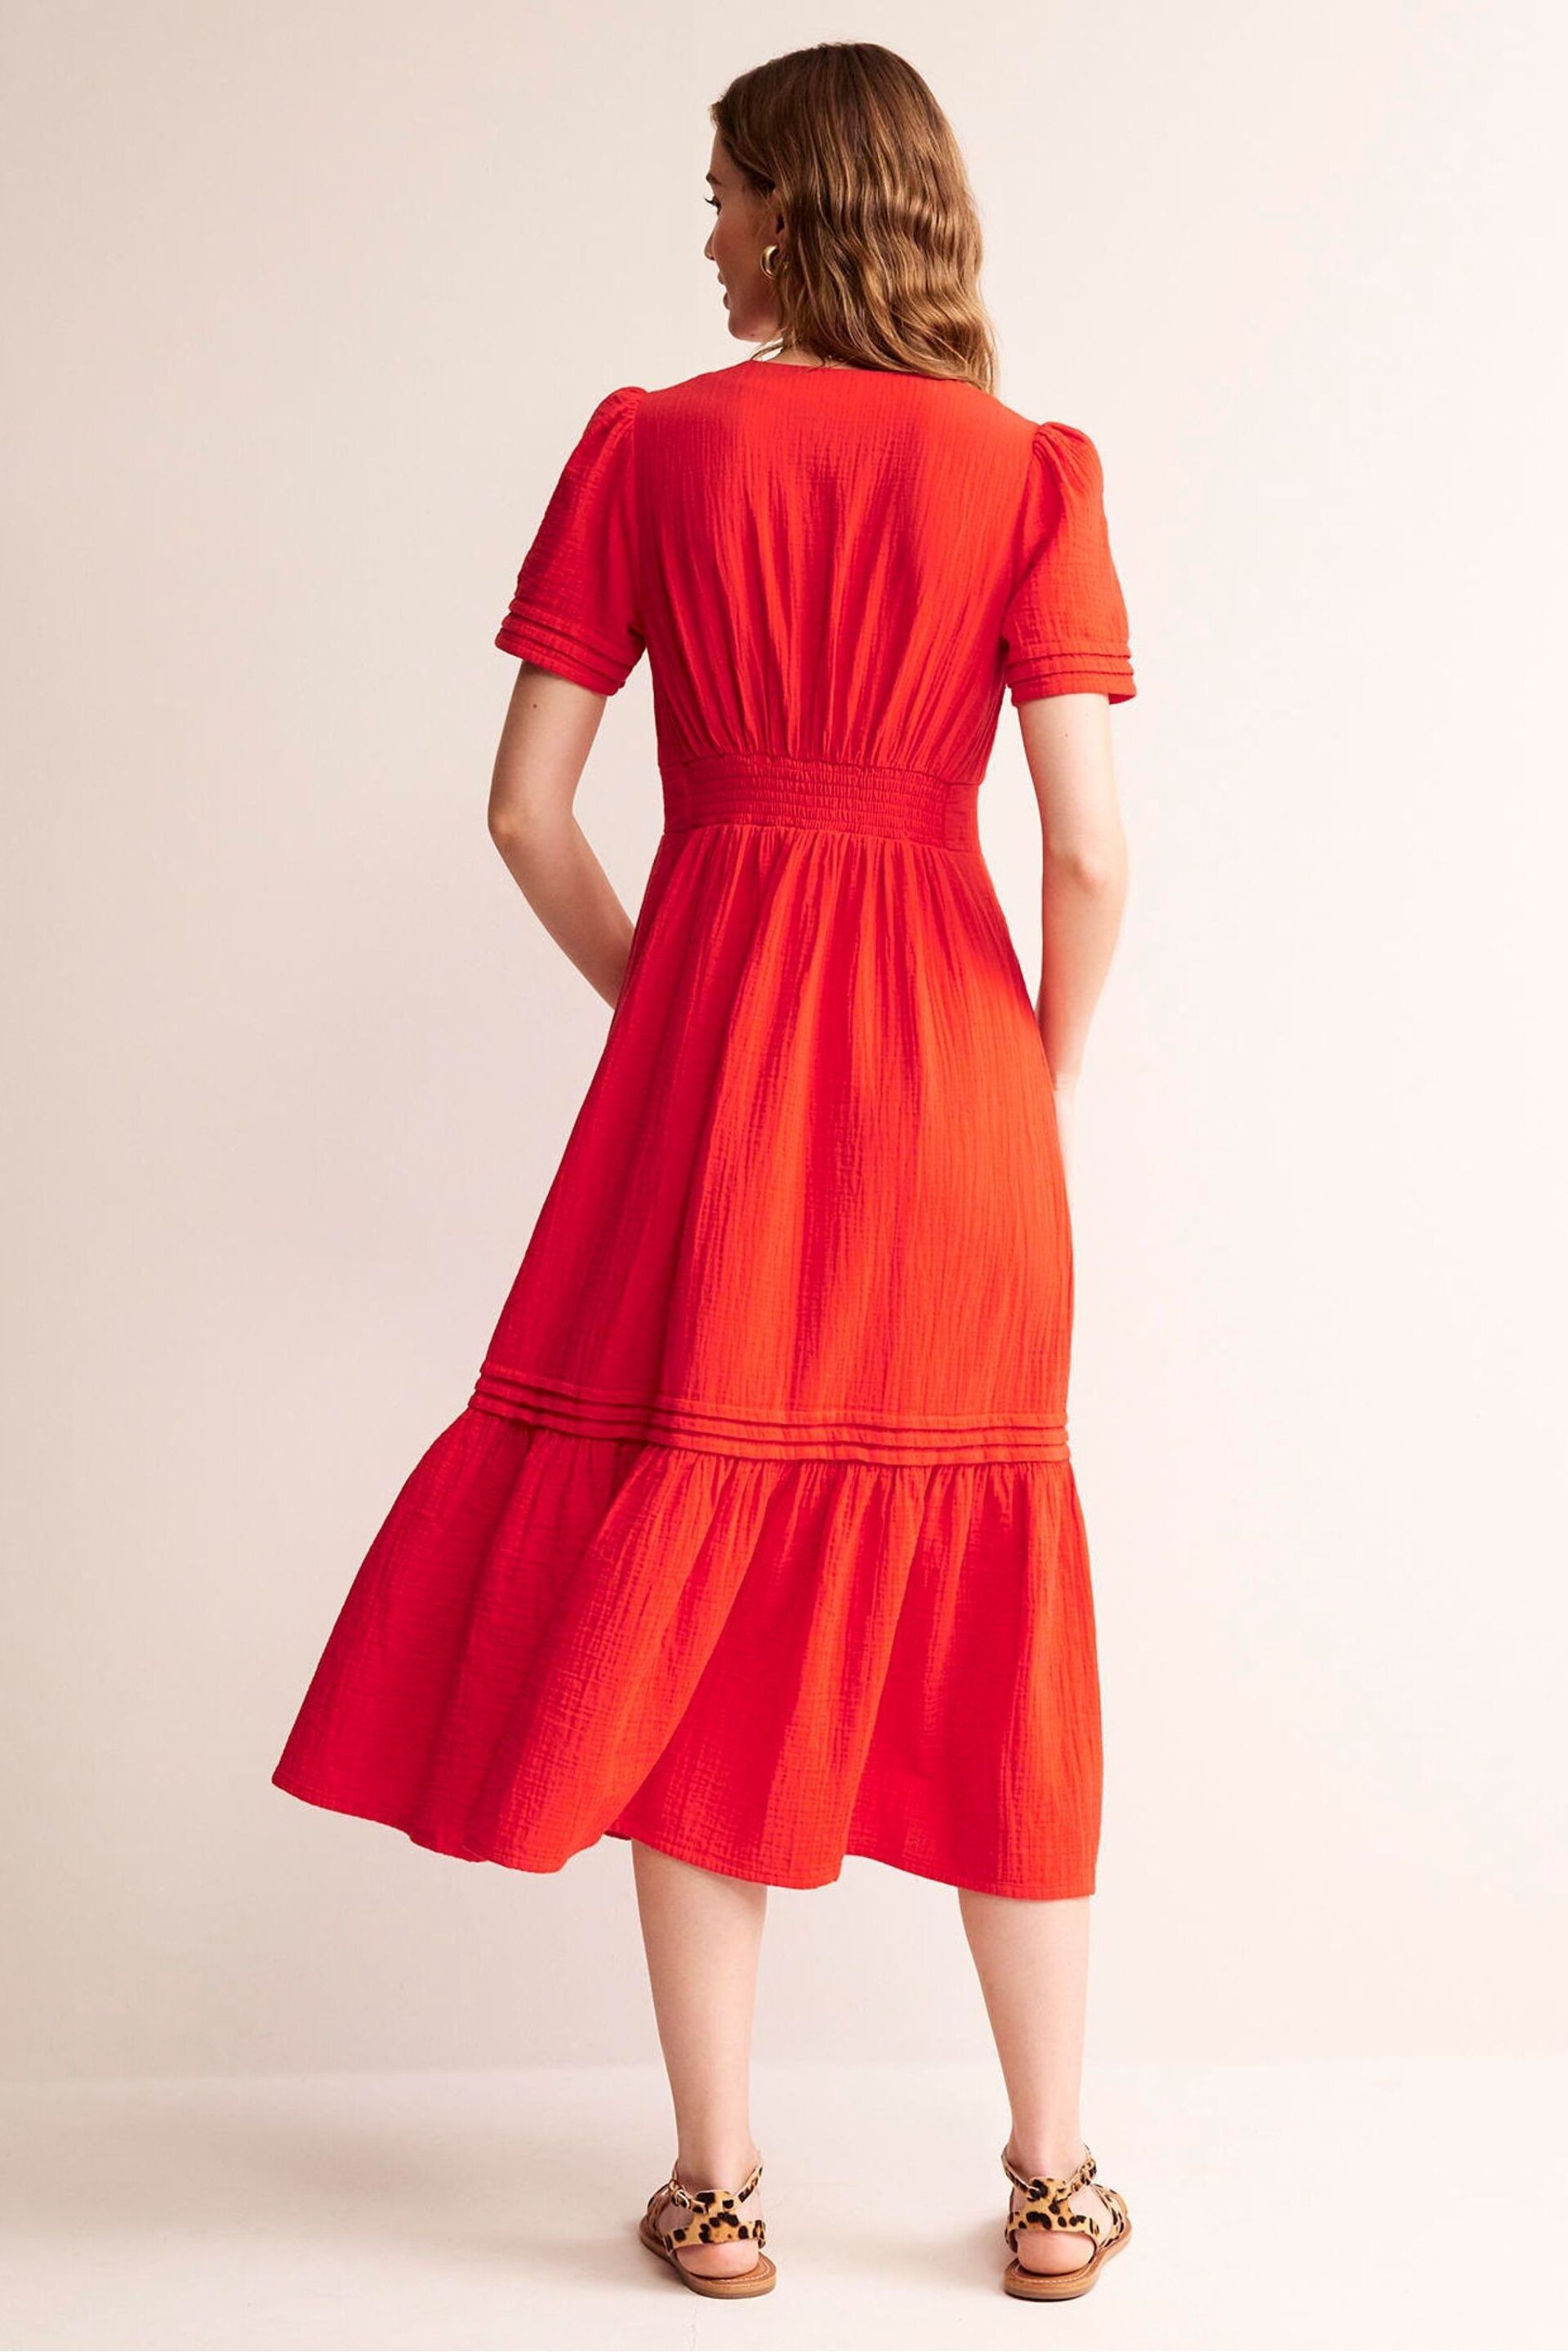 Boden Red Petite Eve Double Cloth Midi Dress - Image 3 of 6